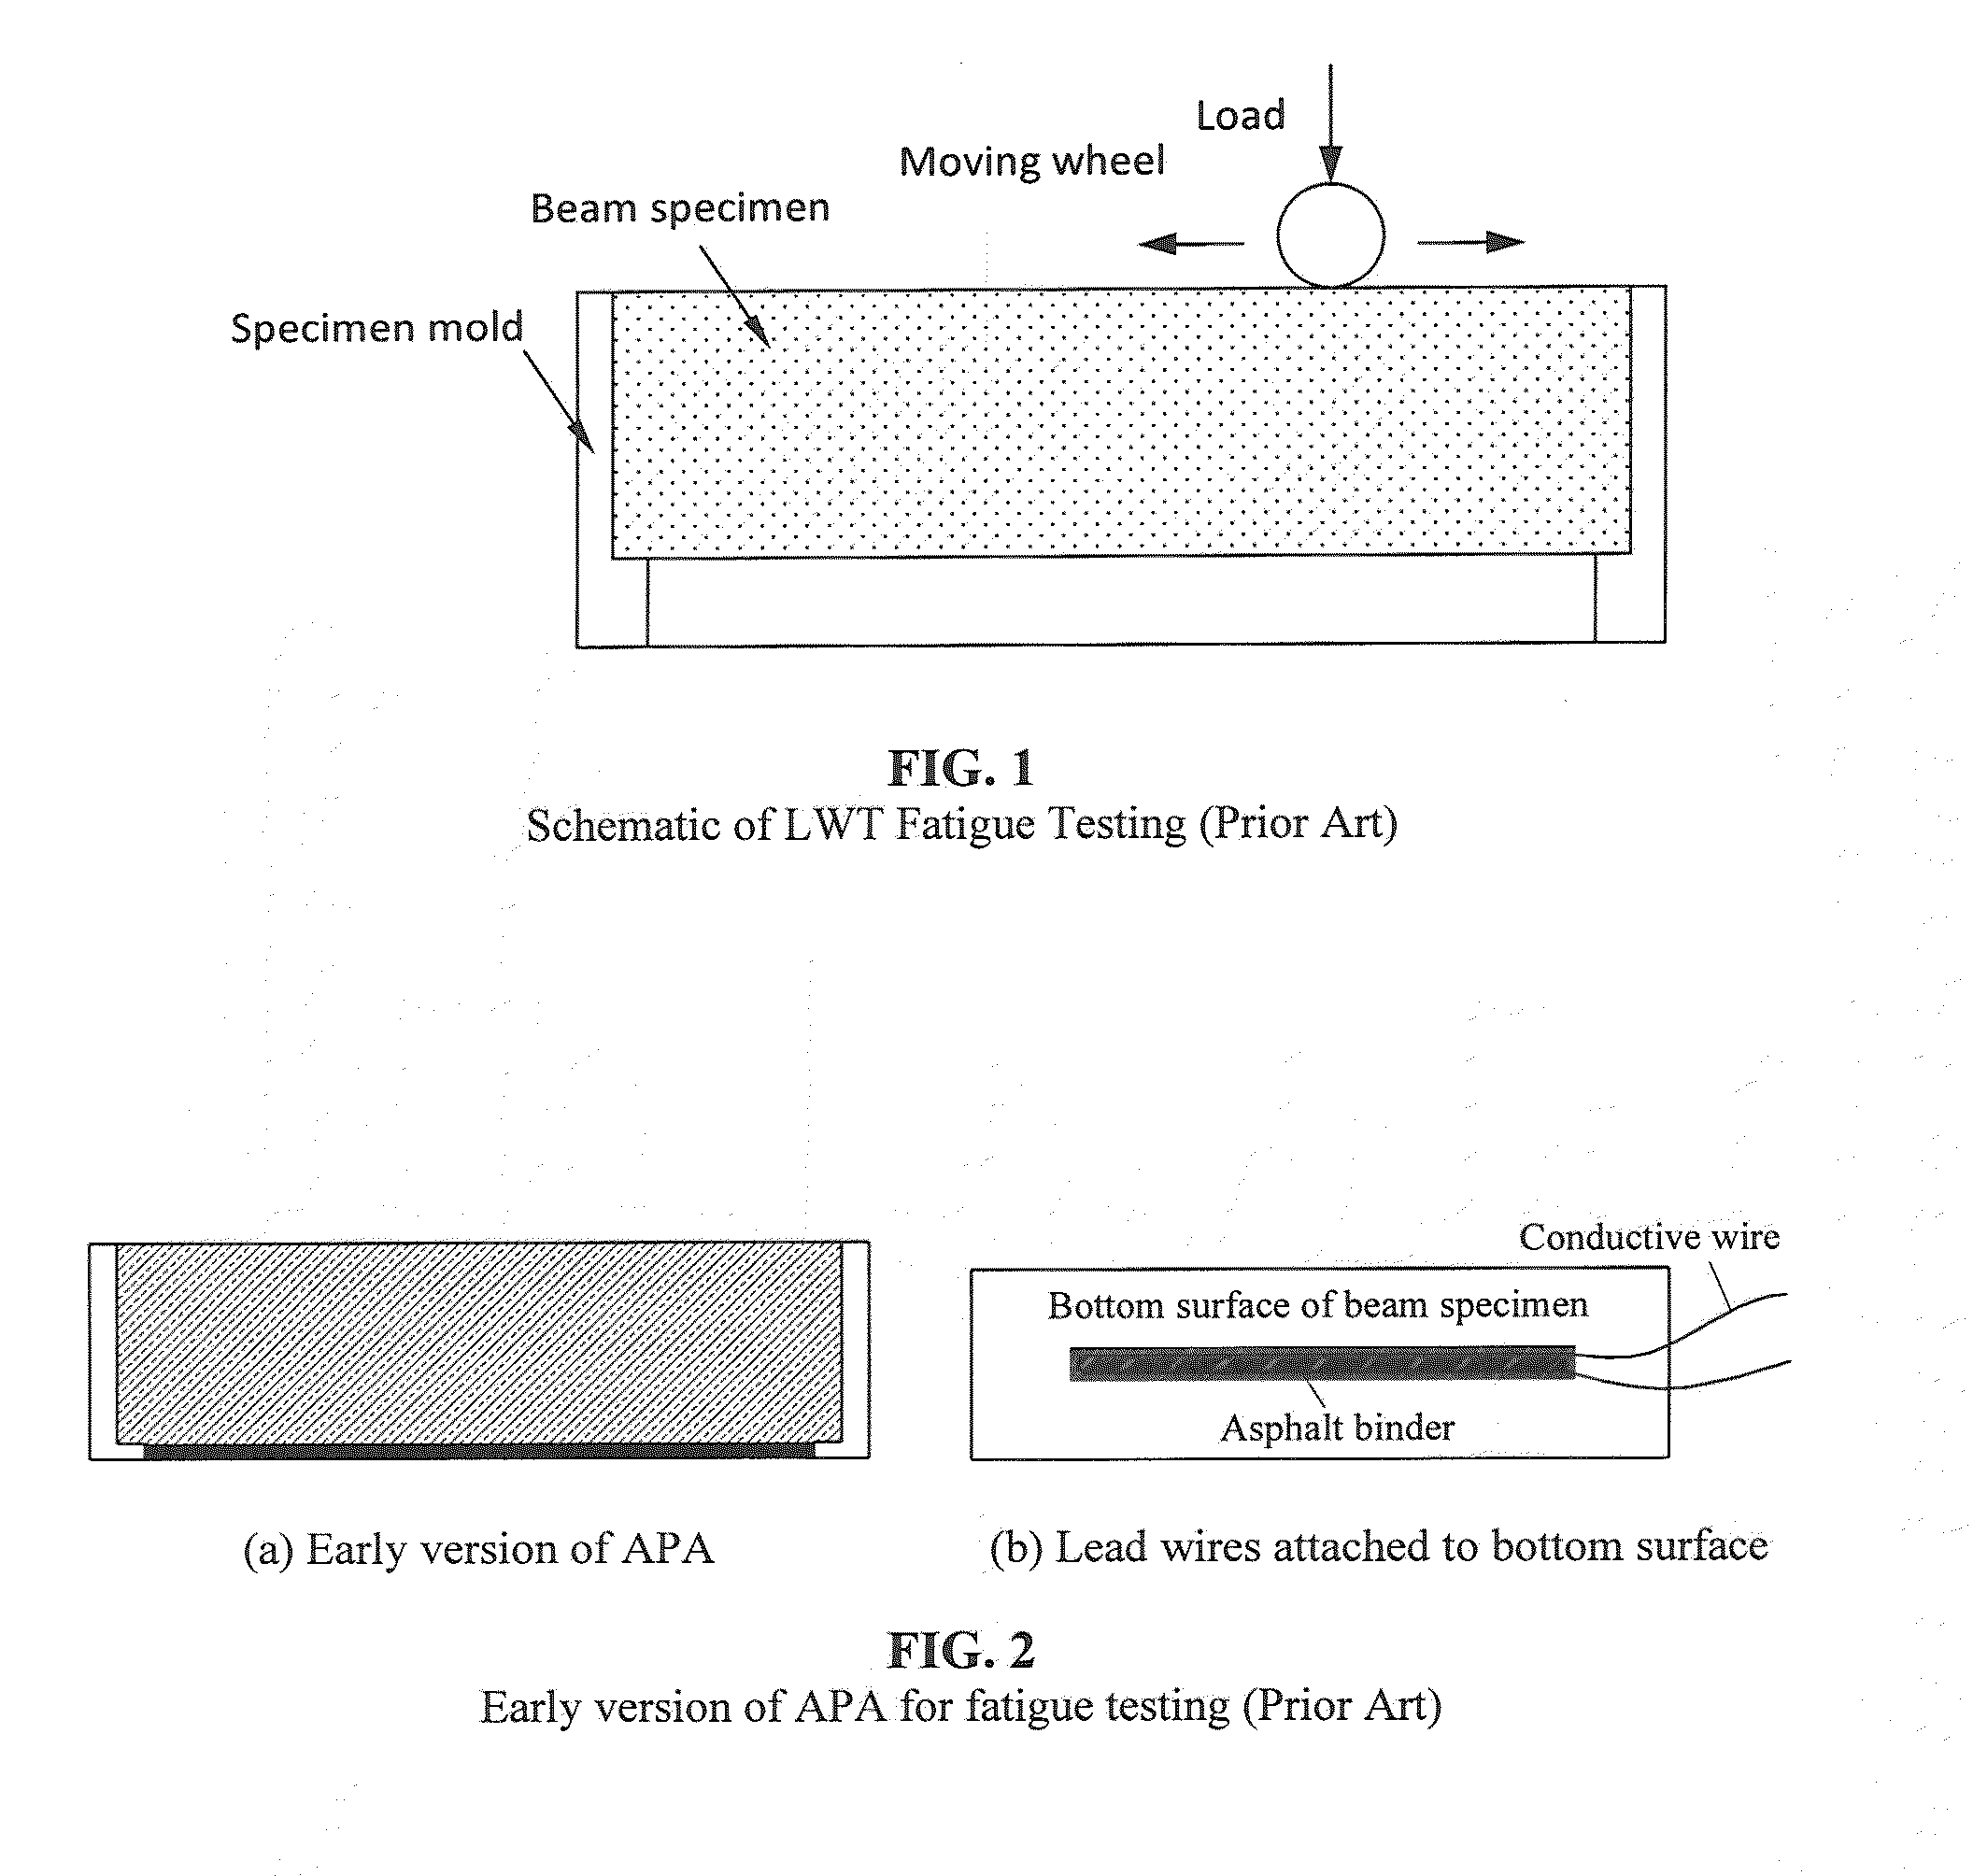 Method and apparatus for fatigue and viscoeleastic property testing of asphalt mixtures using a loaded wheel tester